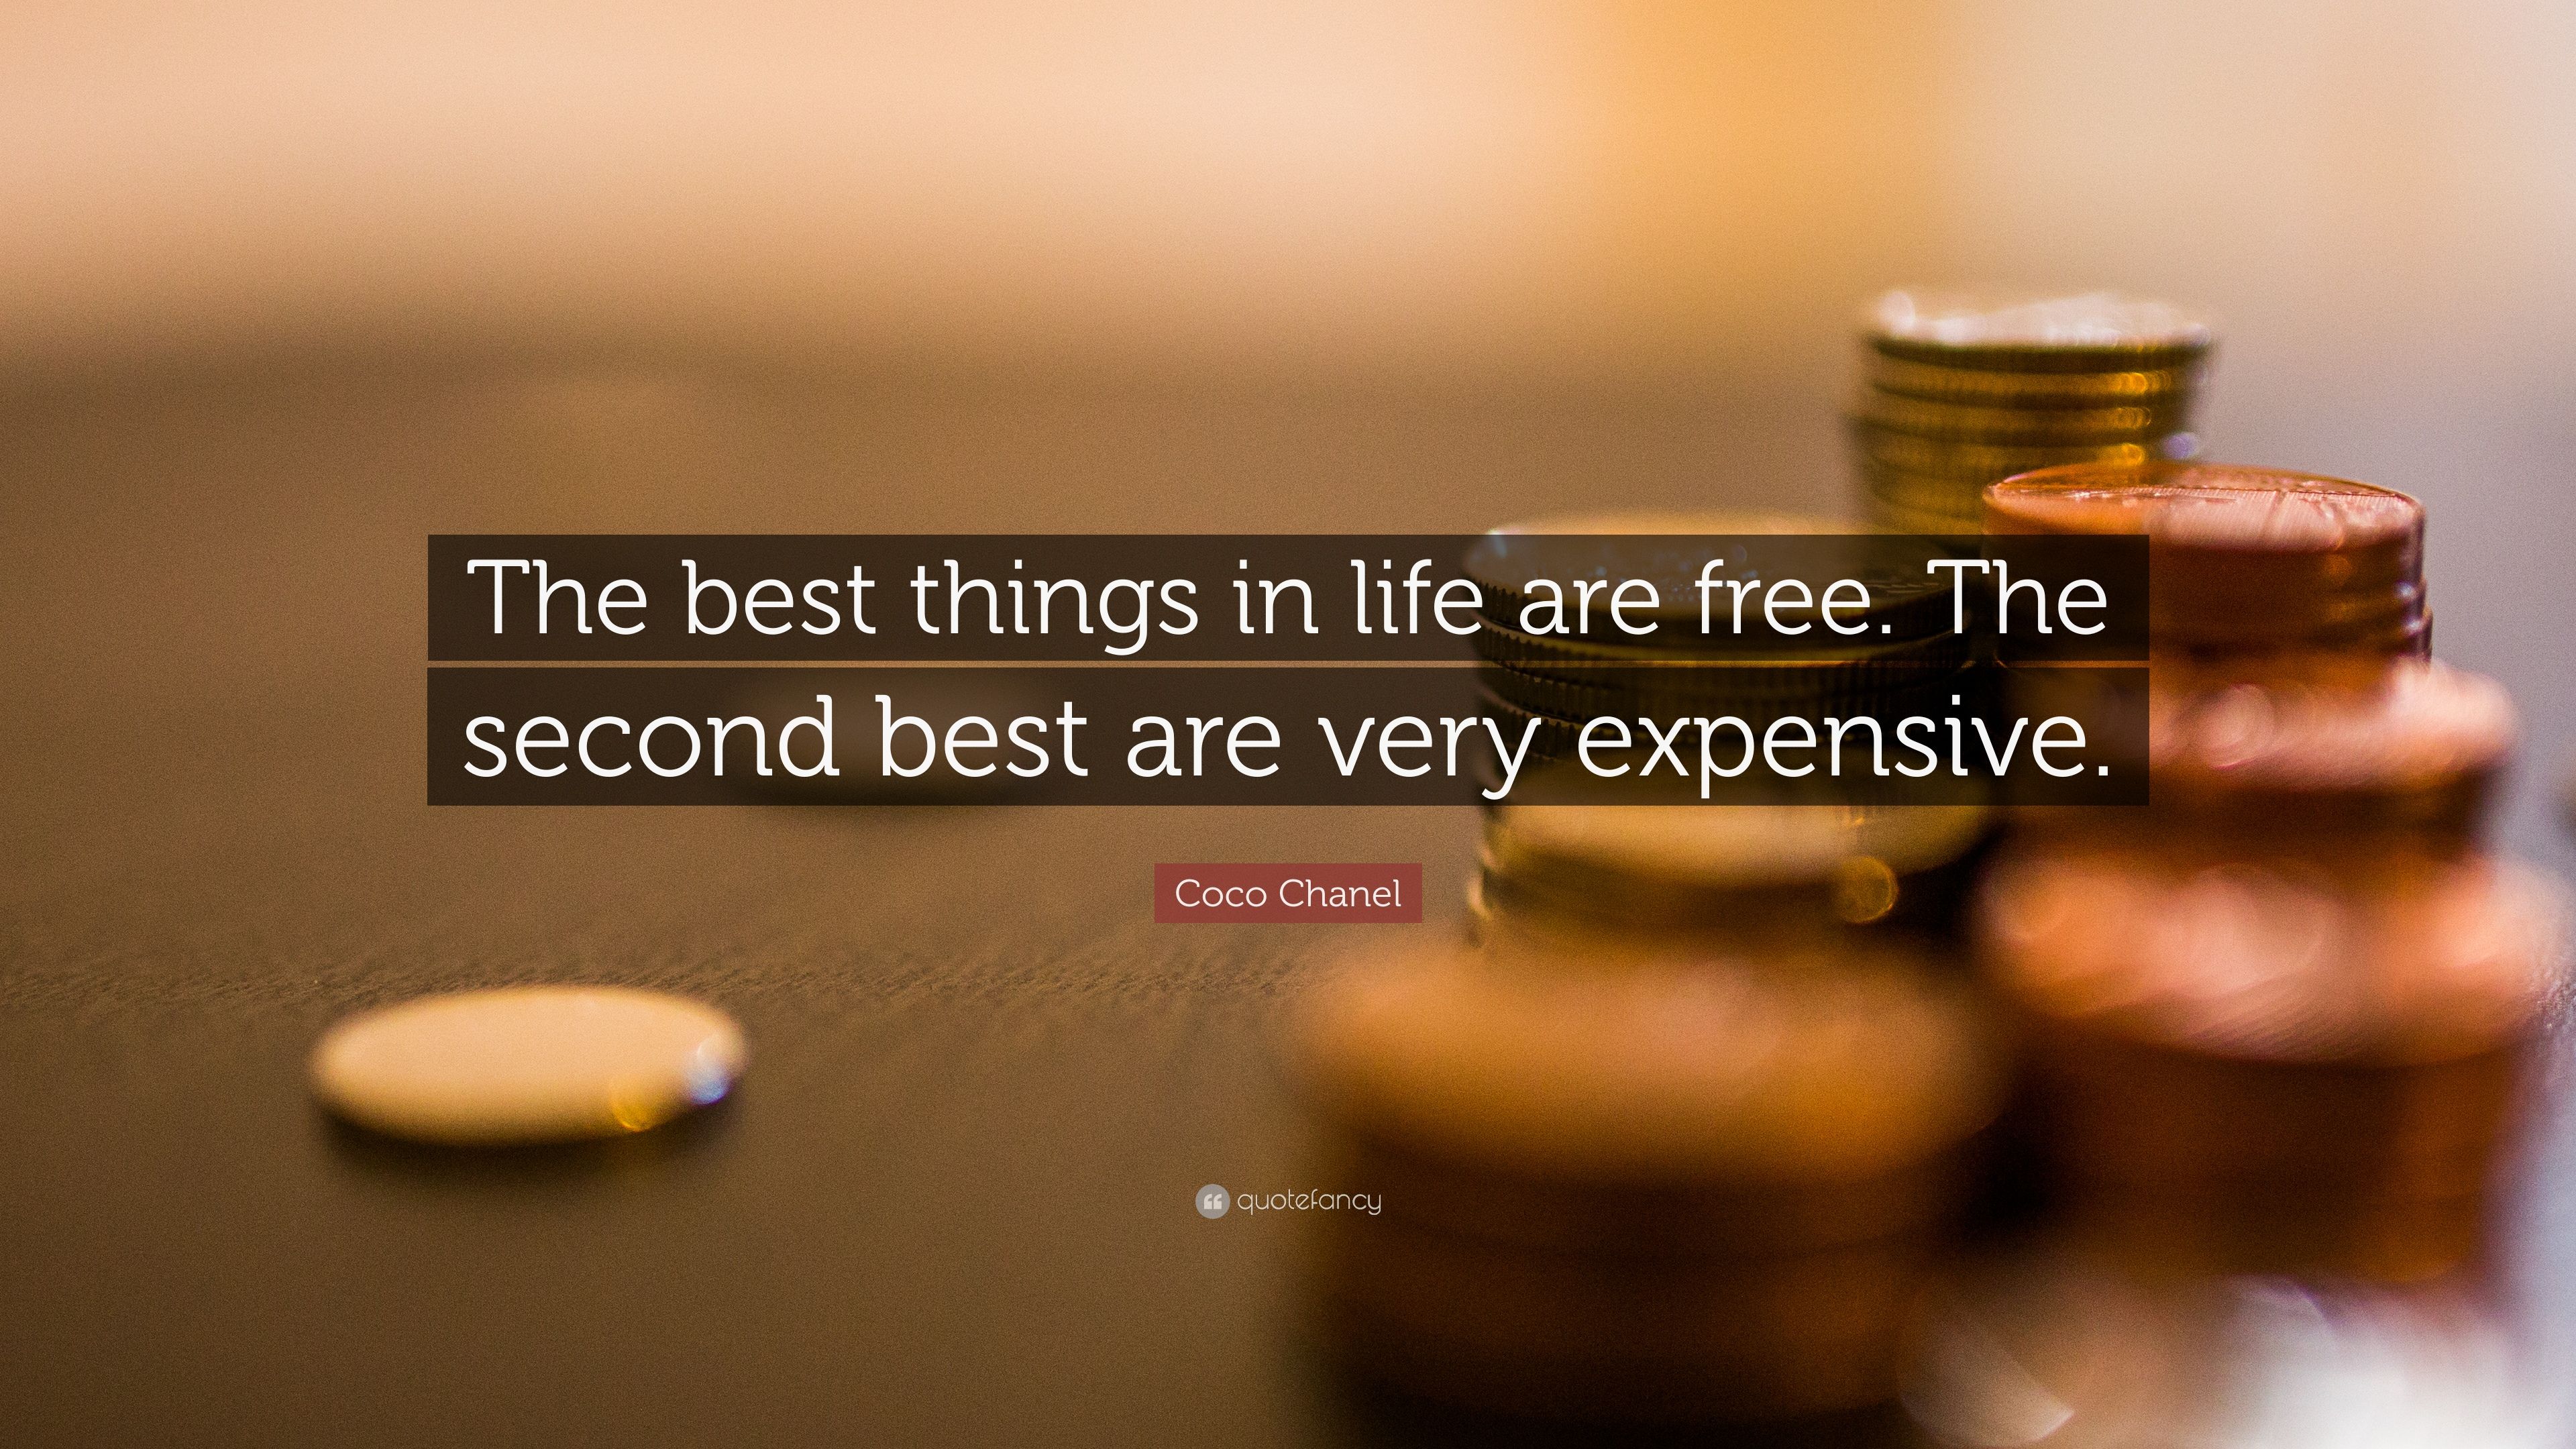 Coco Chanel Quote: “The best things in .quotefancy.com